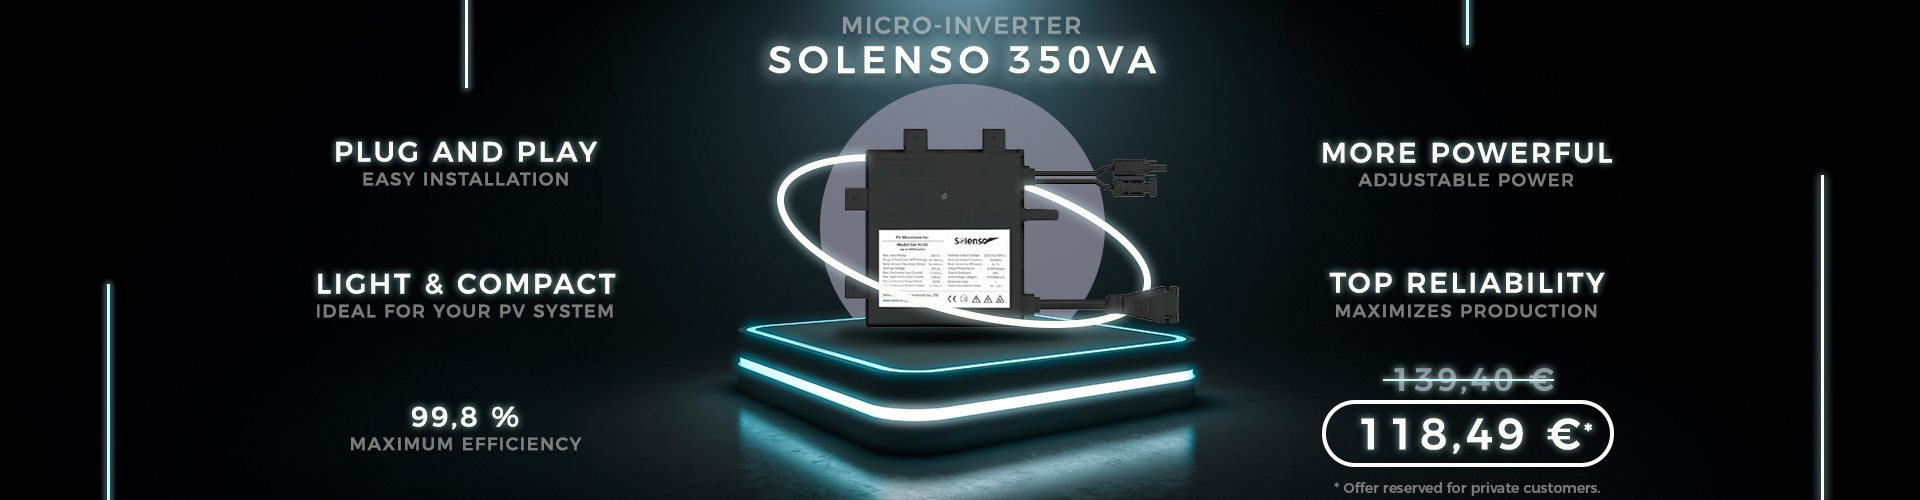 Solenso